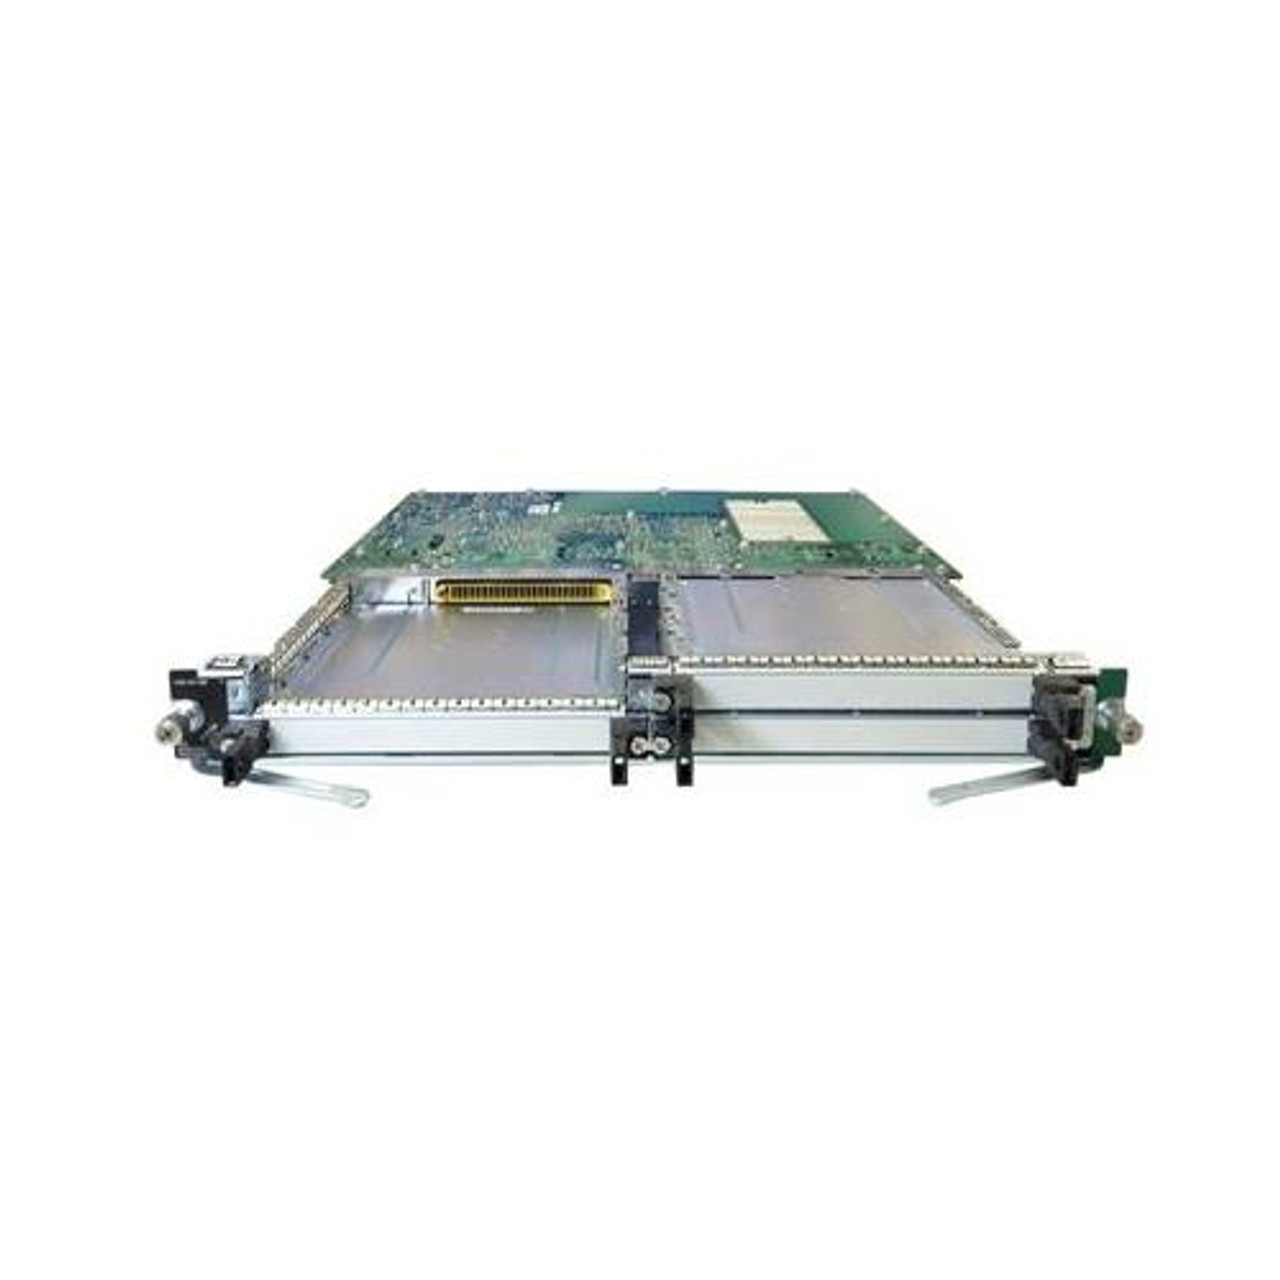 800-24734-01 Cisco Cerent 4x 2.5Gbps 10Gbps Muxpdr 100GHz Card (Refurbished)